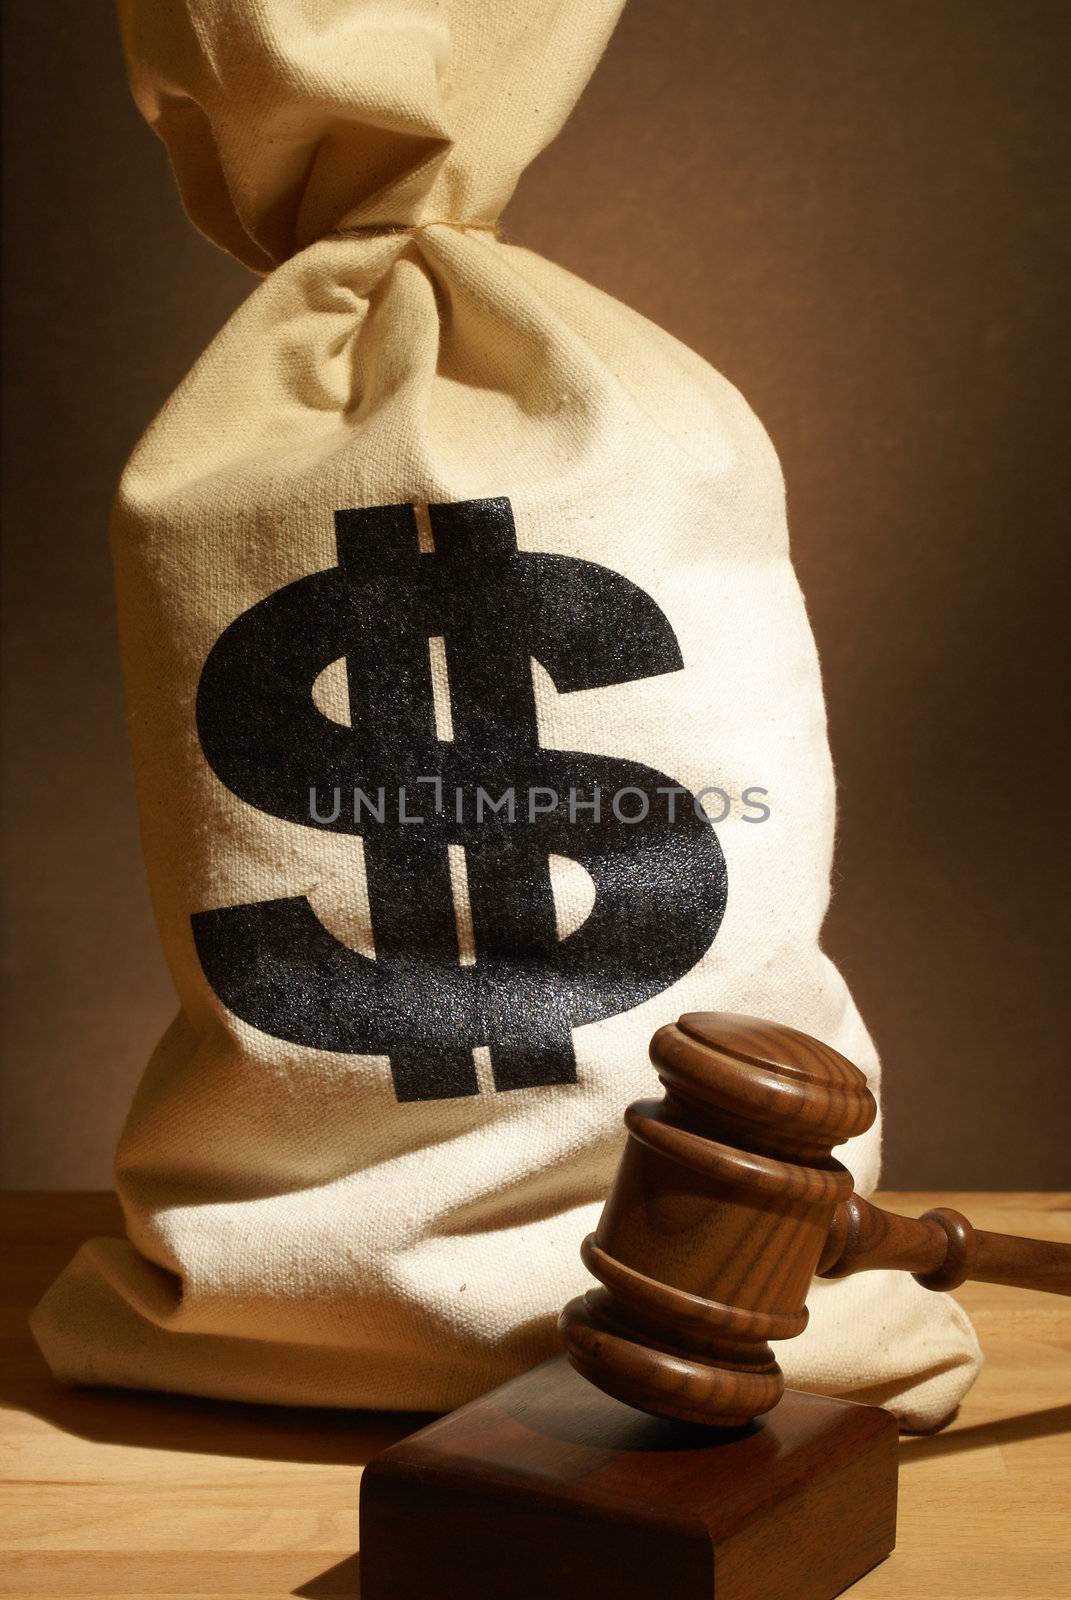 A bag of money and gavel represent many legal expenses.